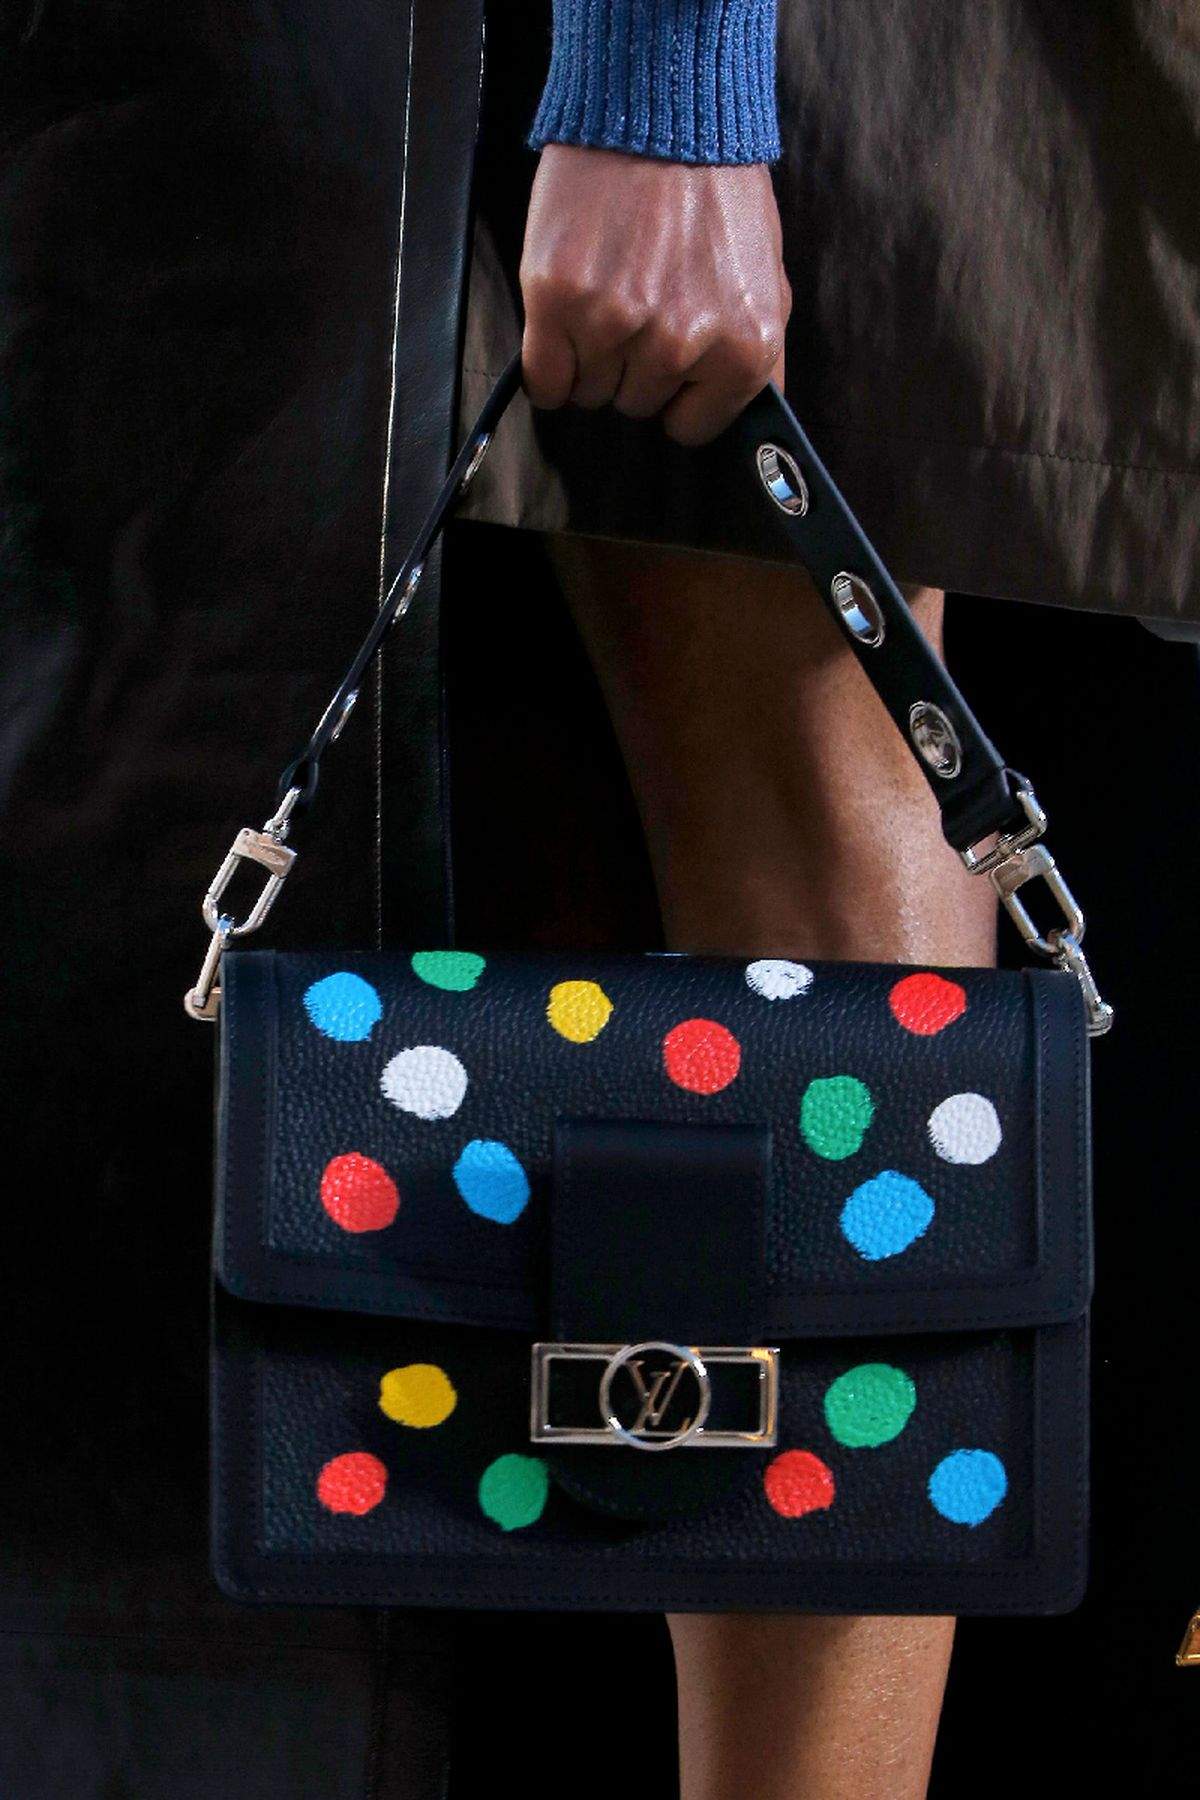 Yayoi Kusama and Louis Vuitton have joined hands for an exclusive